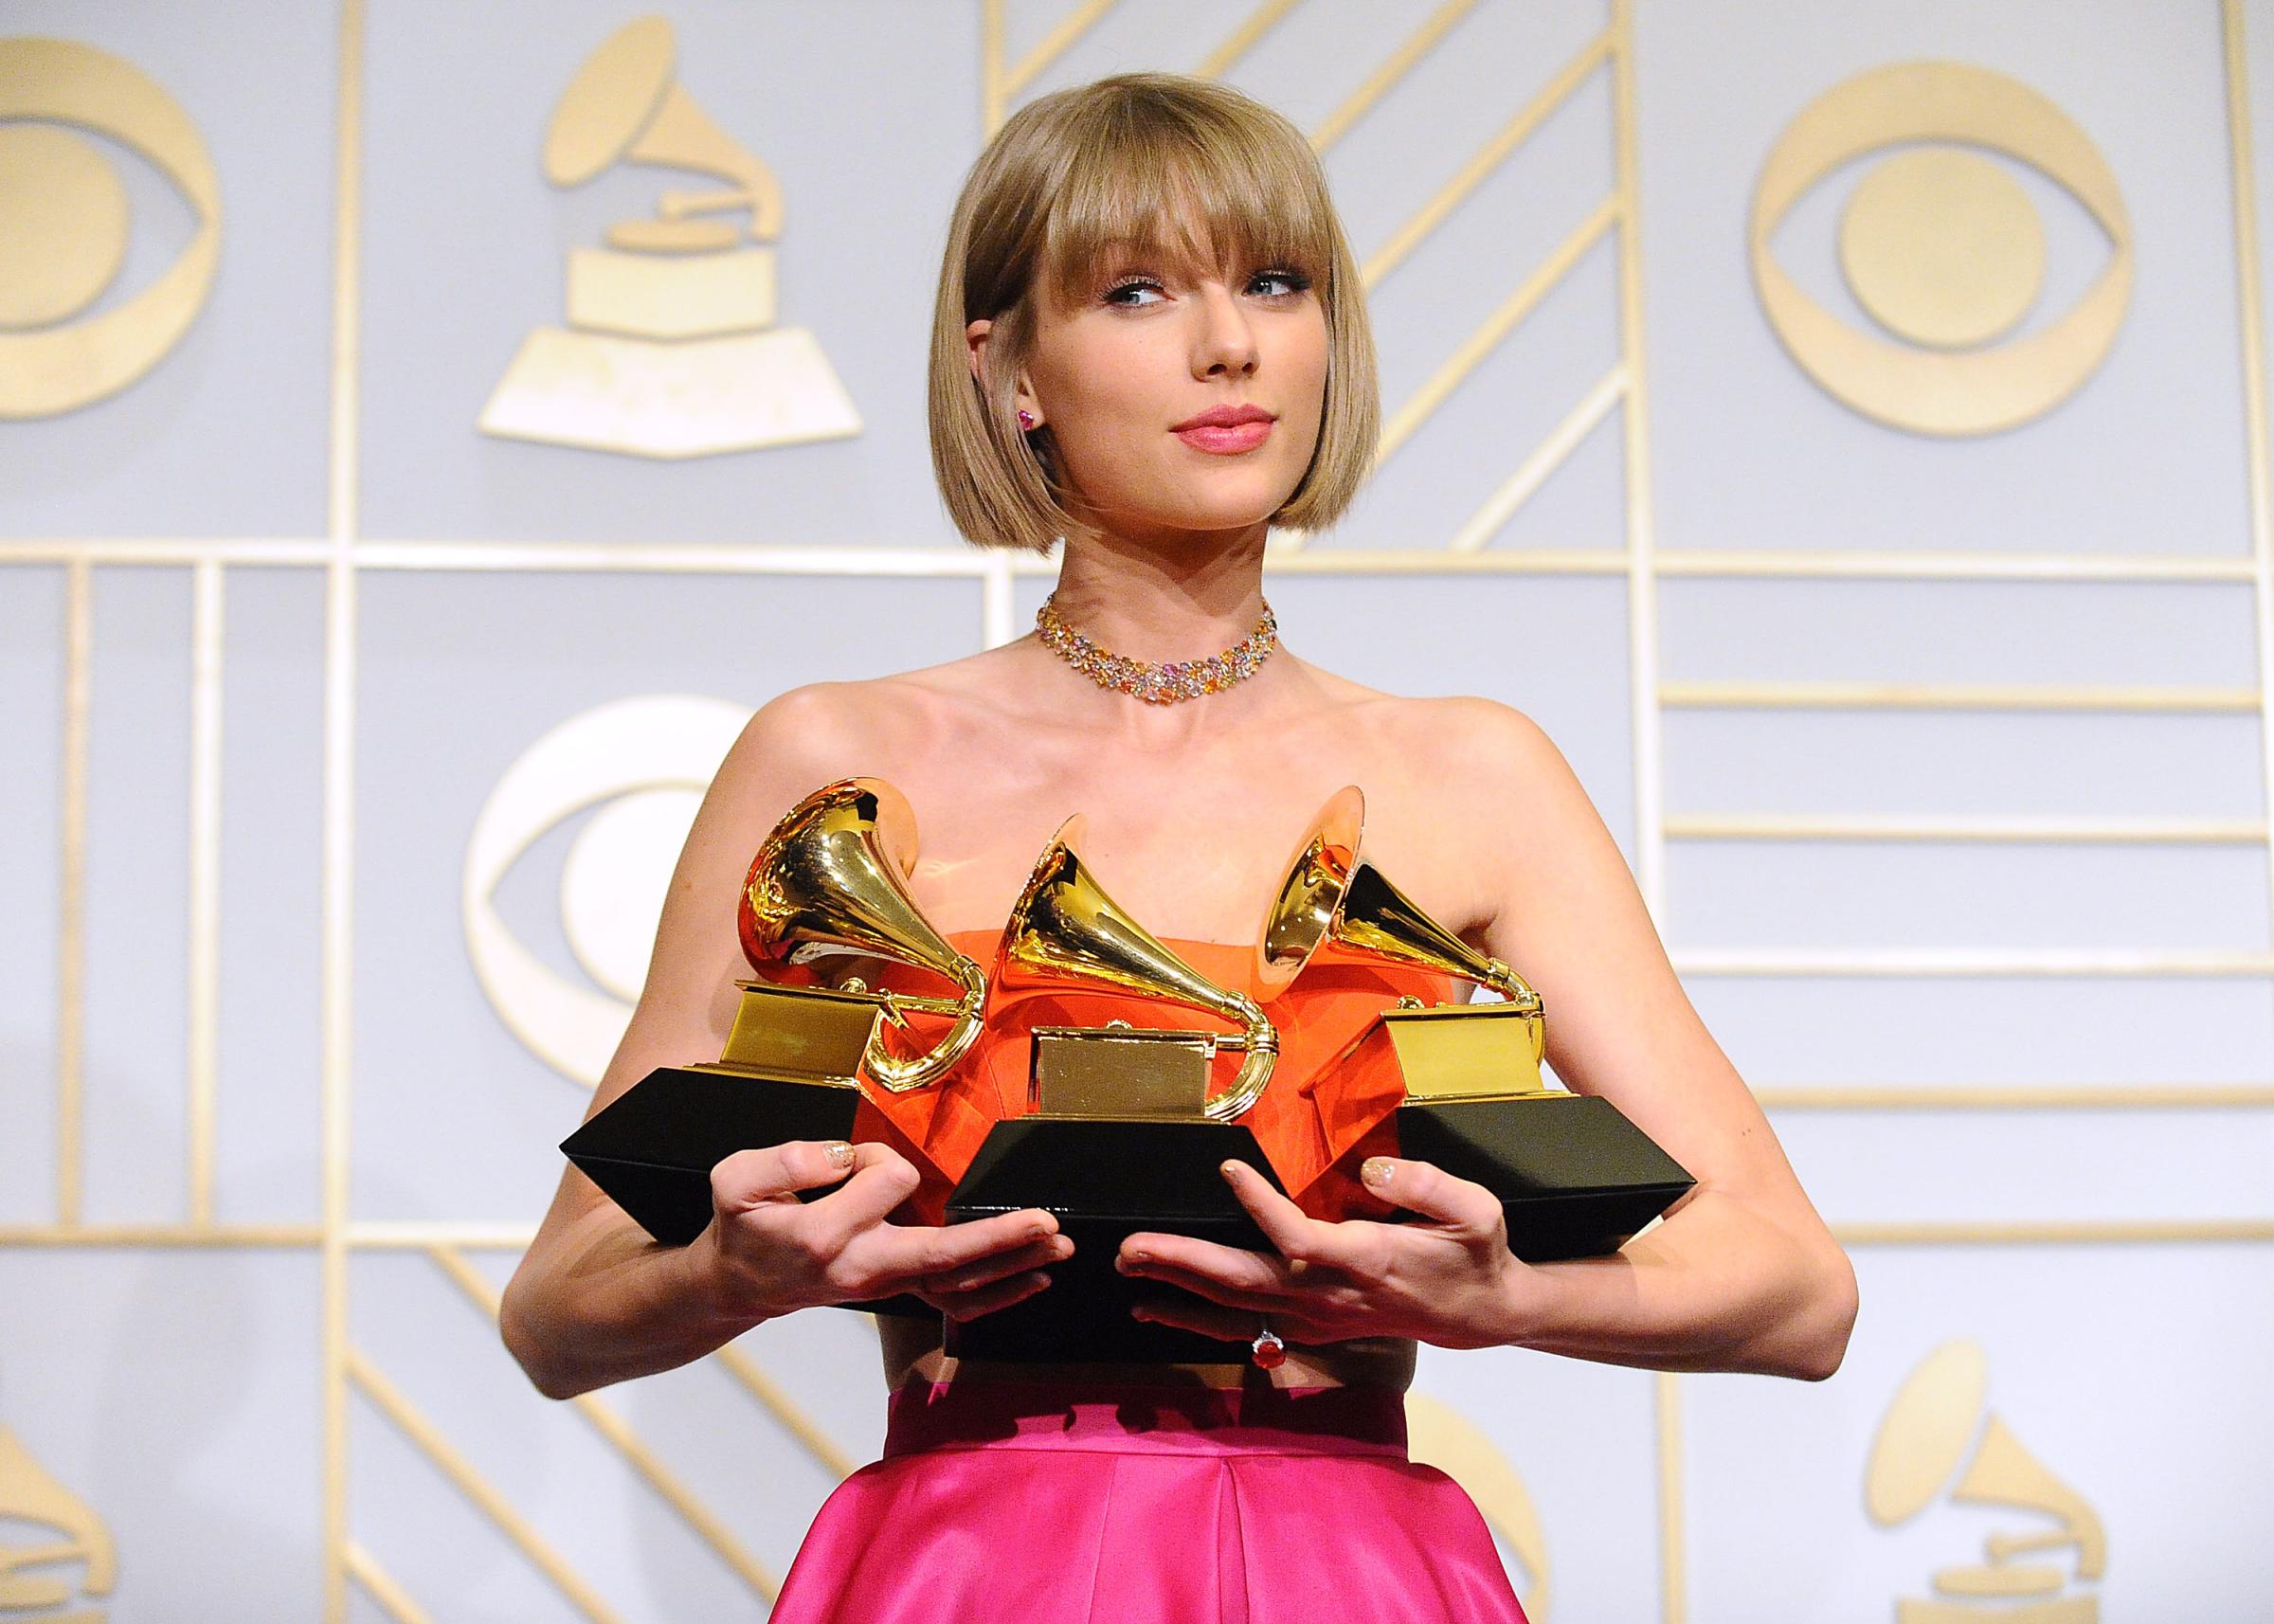 Taylor Swift poses in the press room at the The 58th Grammy Awards on Feb. 15 in Los Angeles.